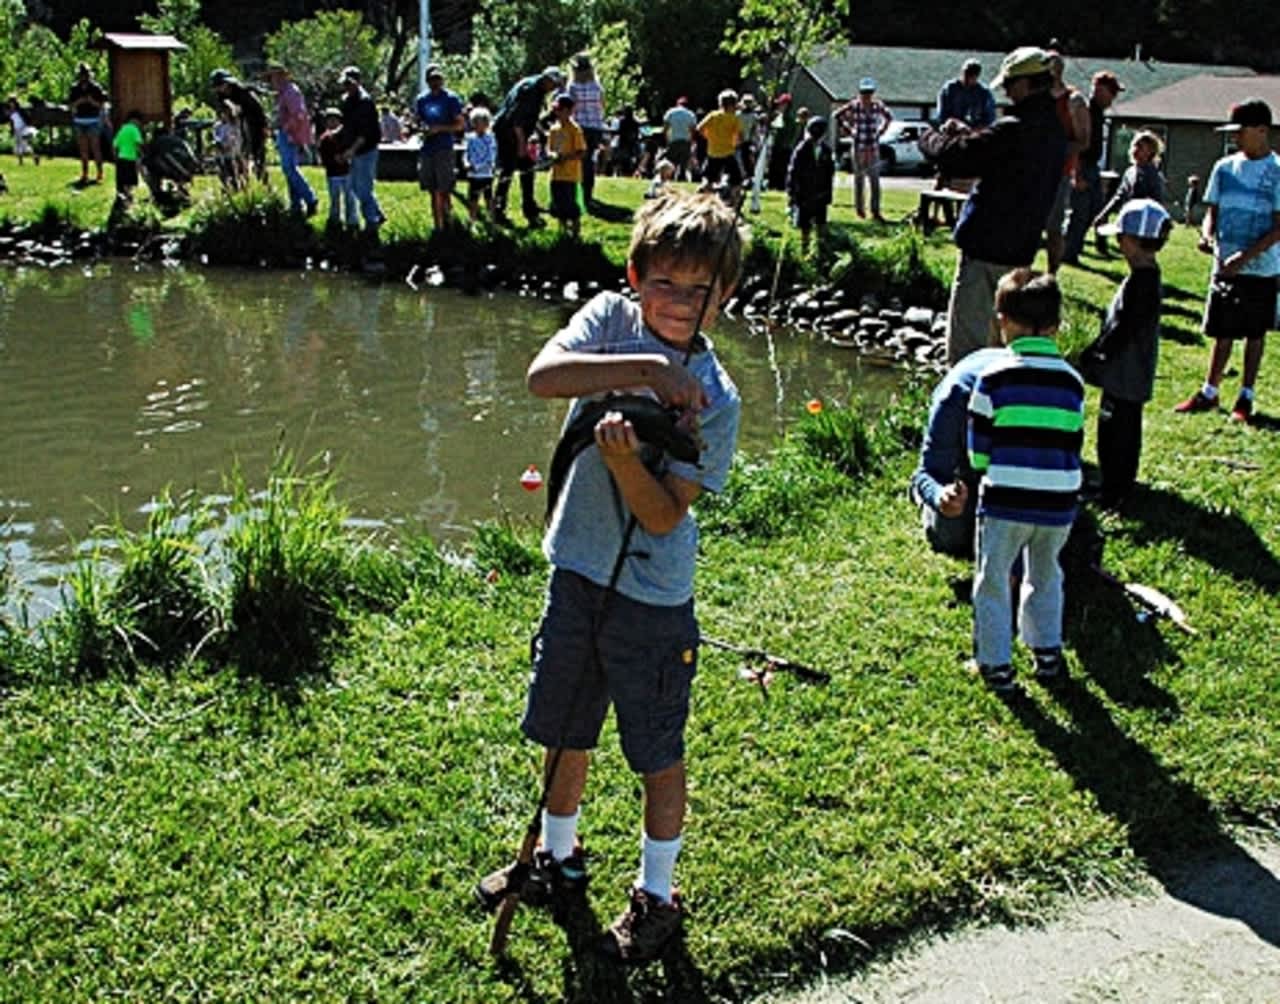 Kids can compete in a June 26 fishing derby.